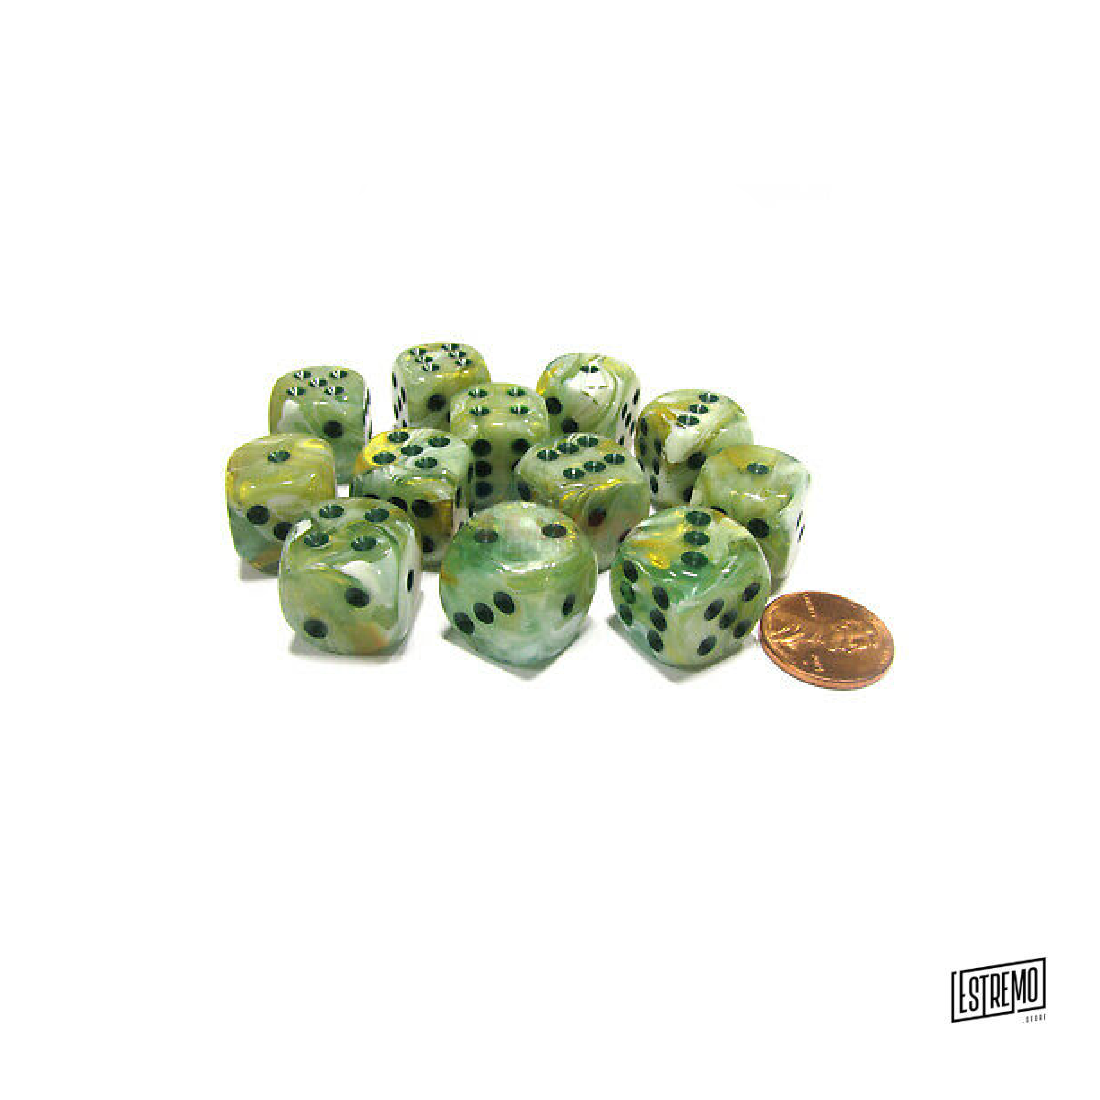 CHESSEX 16MM D6 WITH PIPS DICE BLOCKS (12 DICE) - MARBLE GREEN W/DARK GREEN